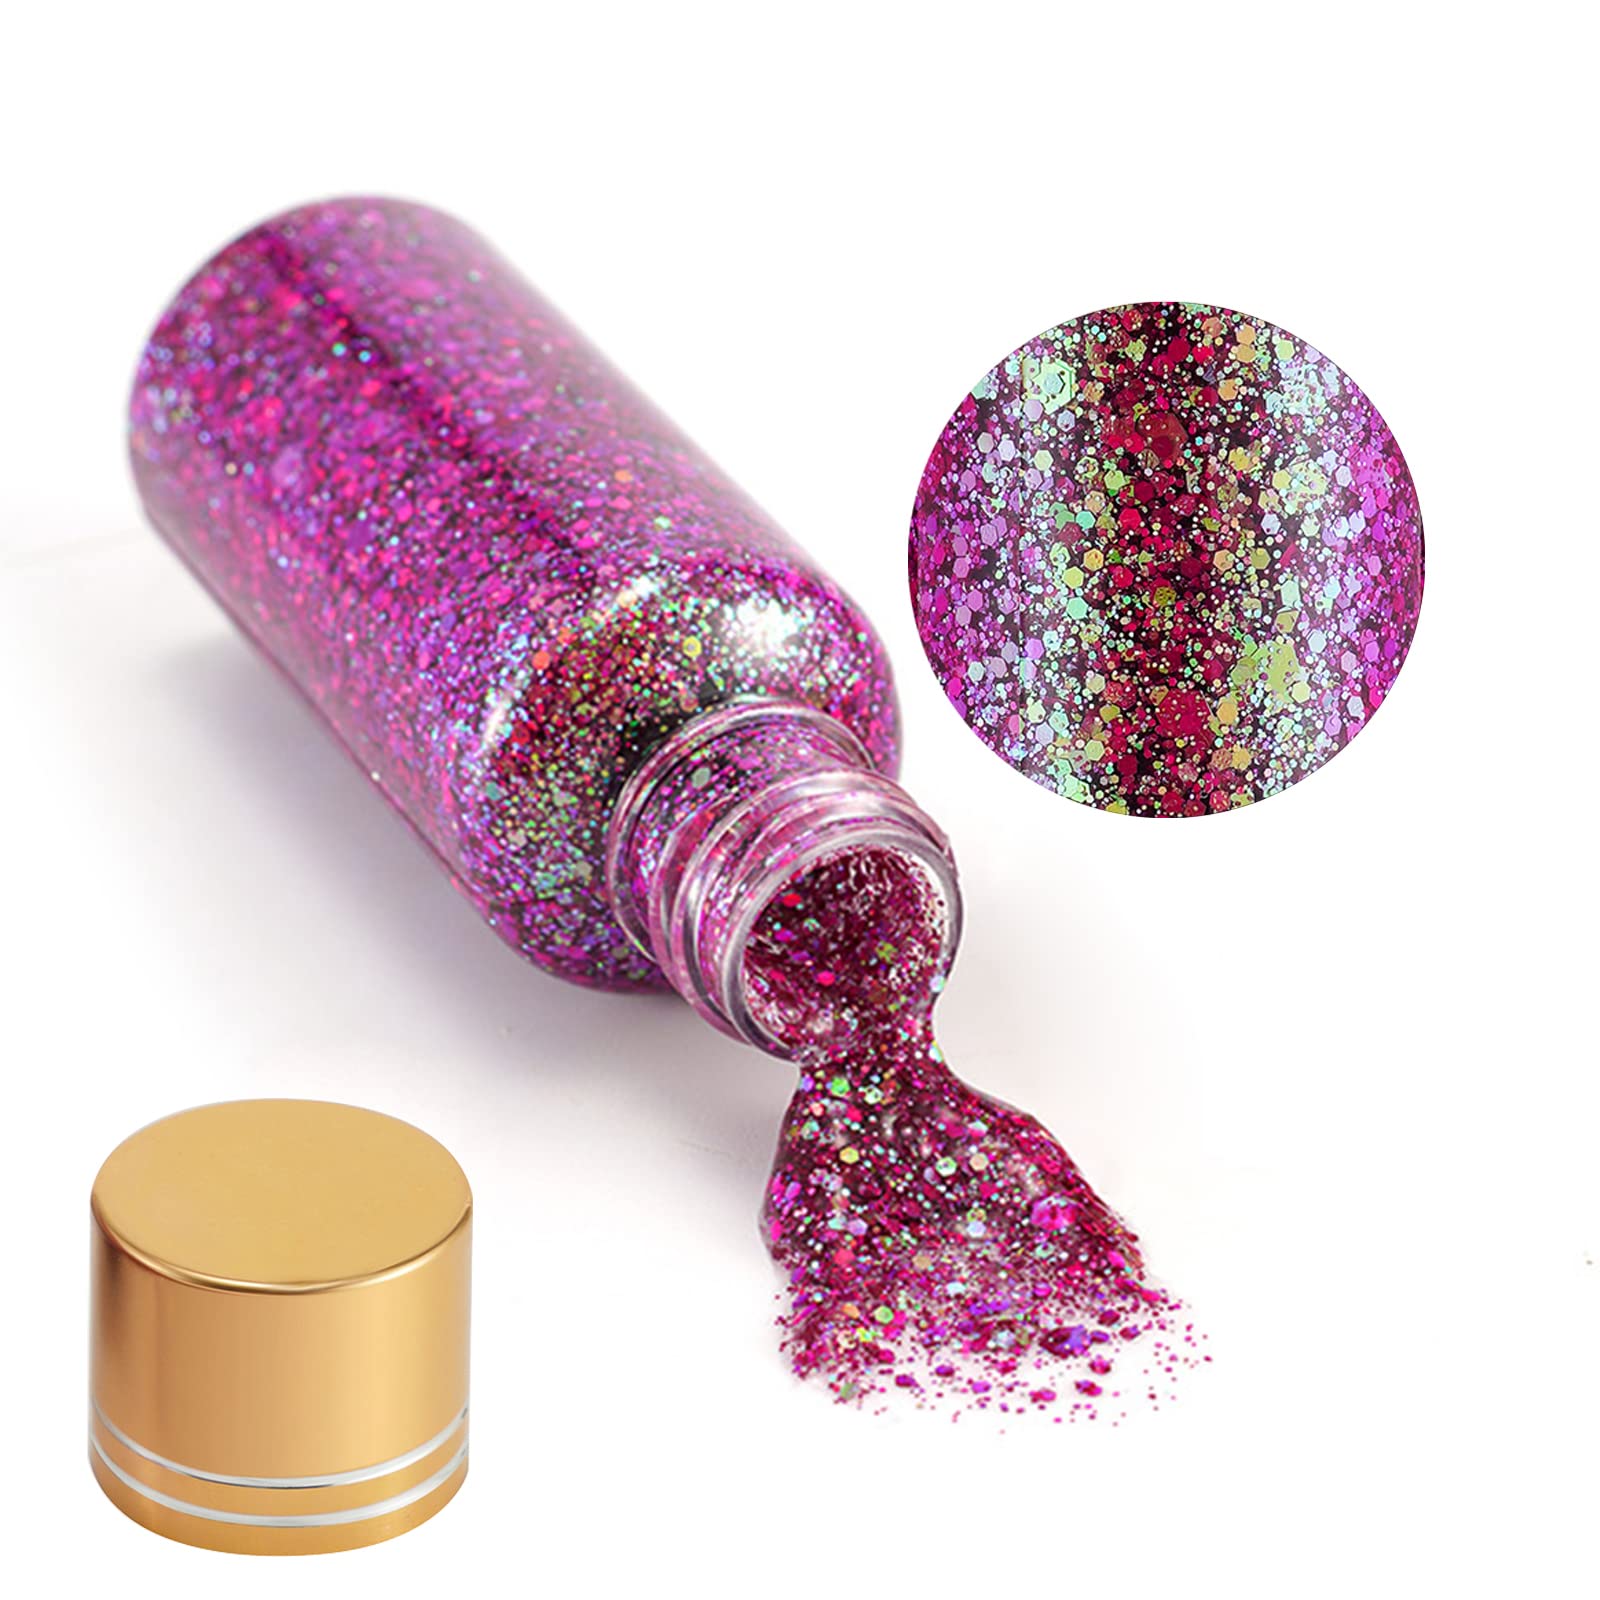  Cosmetic Grade Glitter, 150g Holographic Glitter for Nail Eye  Face Body Hair, Multi Purpose Metallic Fine Glitters for Body Makeup,  Halloween Holiday Festival & Party (Blush Pink) : Beauty & Personal